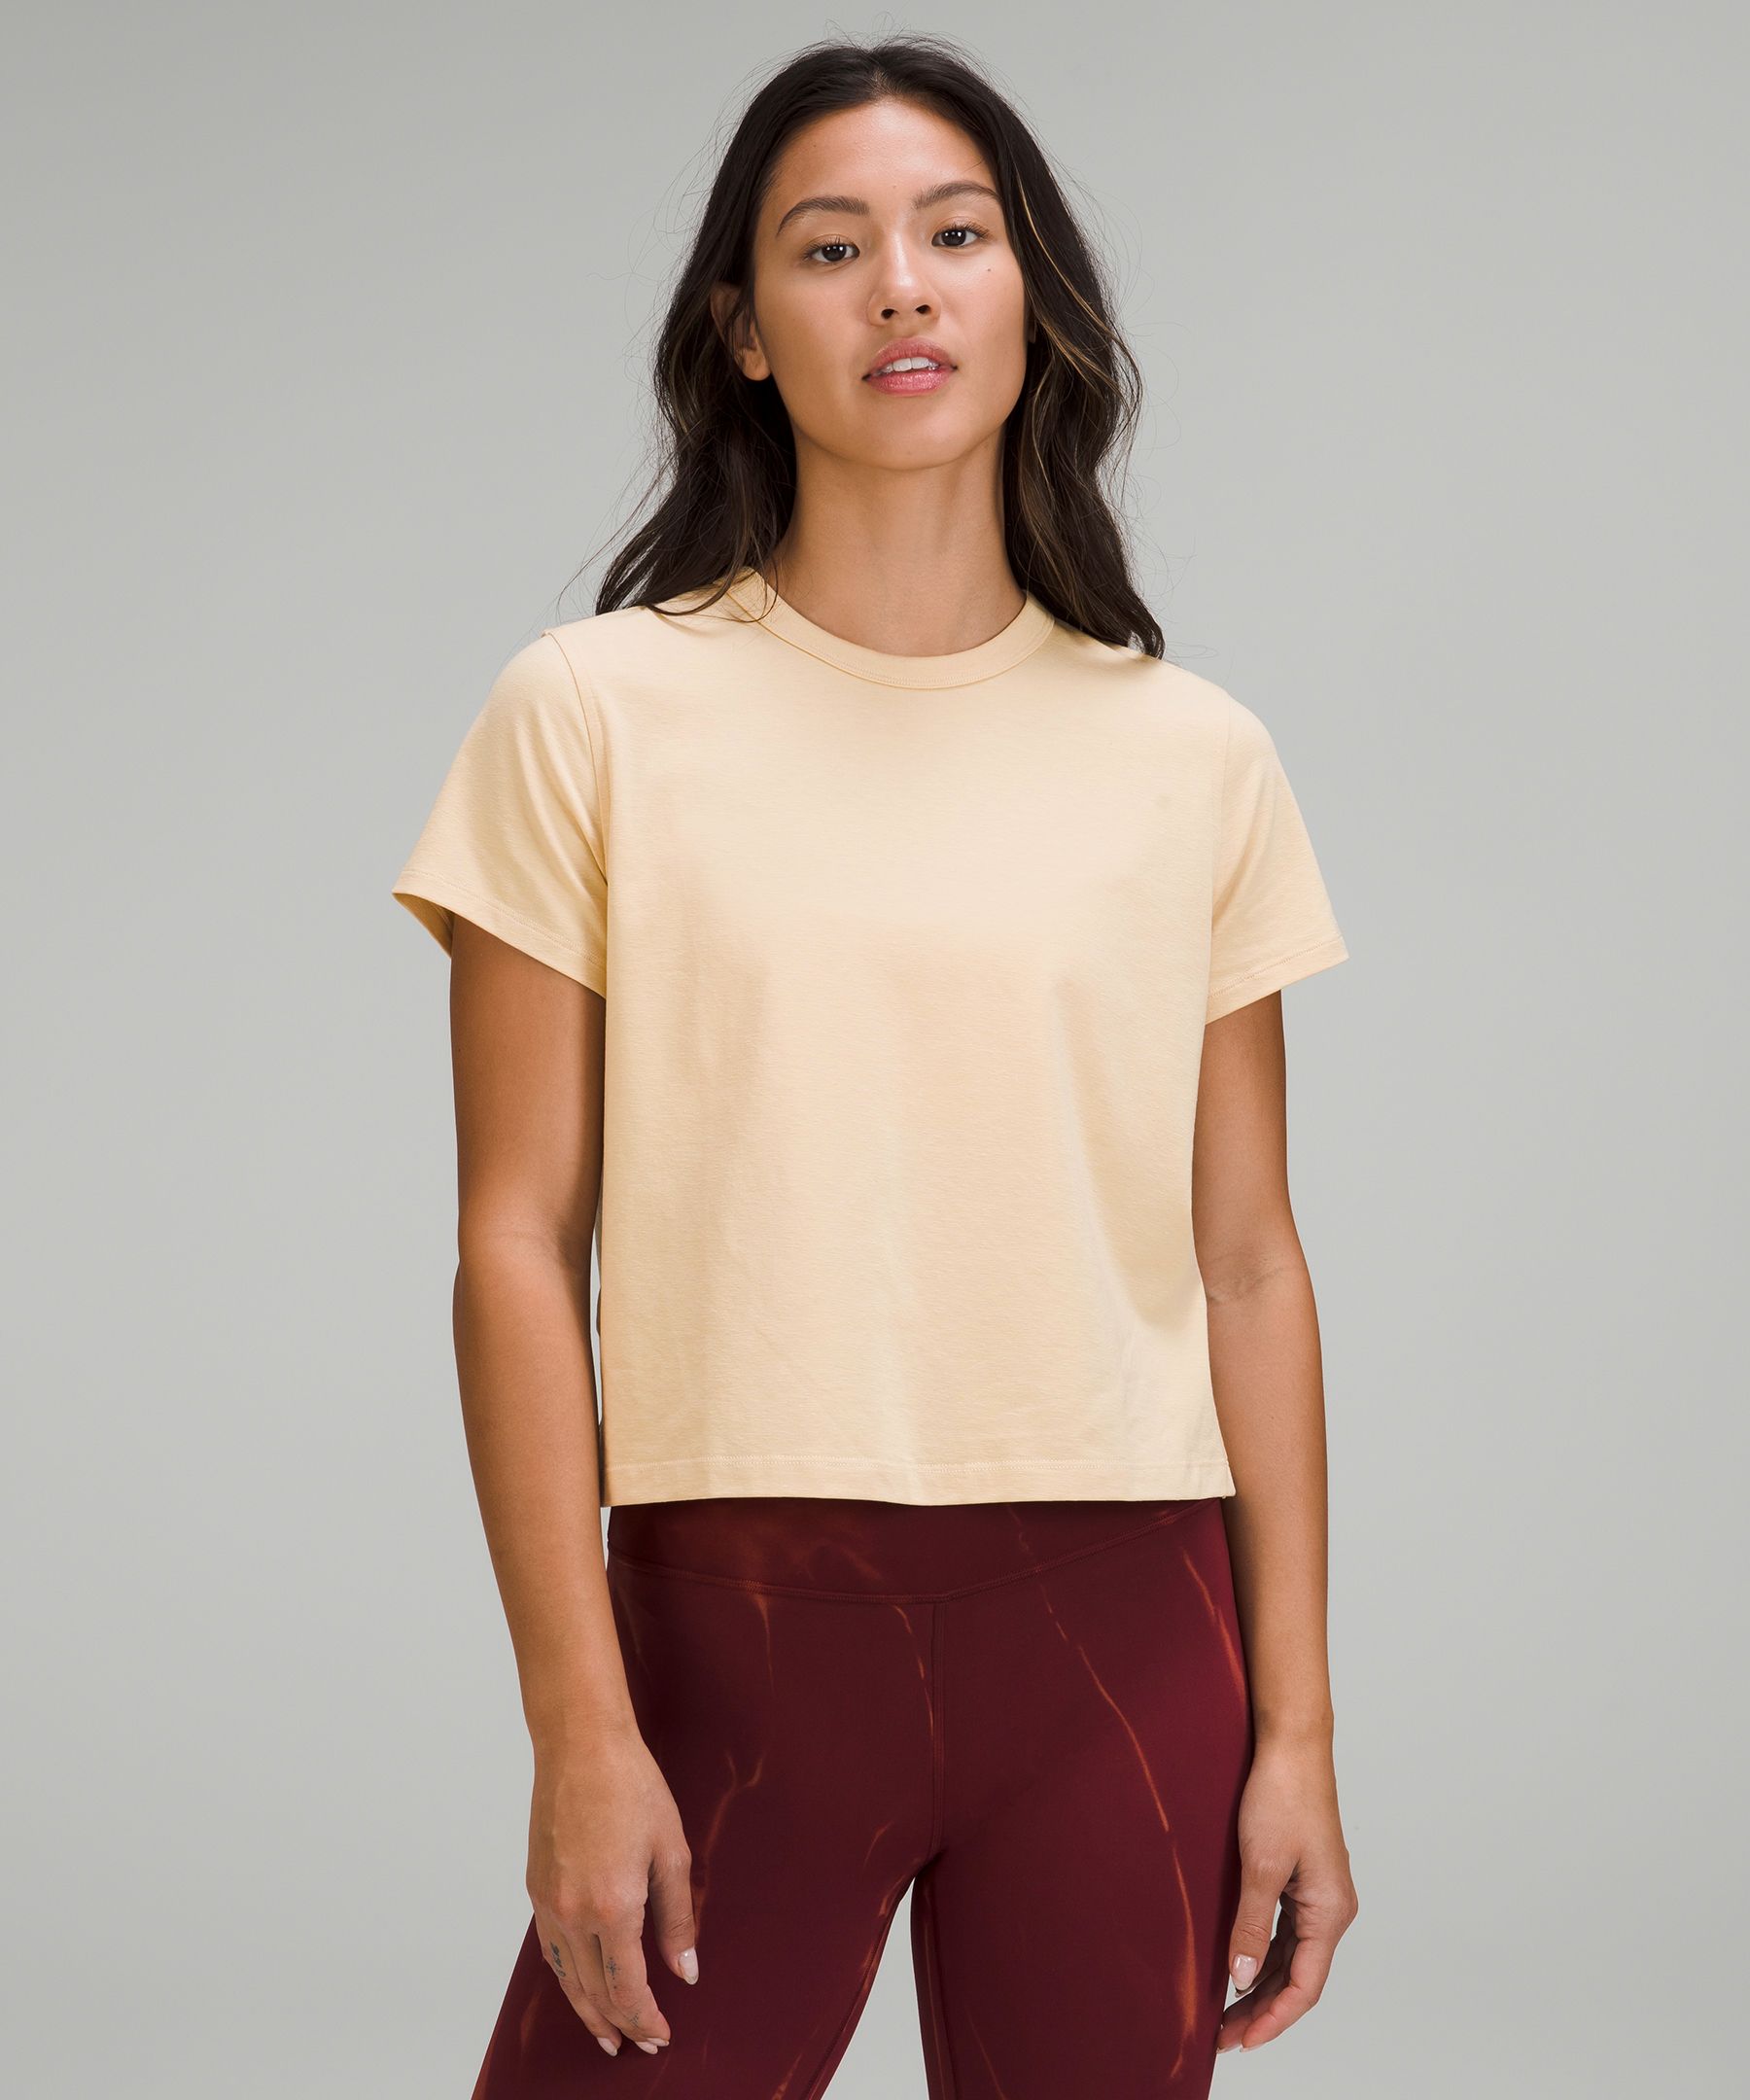 Lululemon Classic-fit Cotton-blend T-shirt In Prosecco